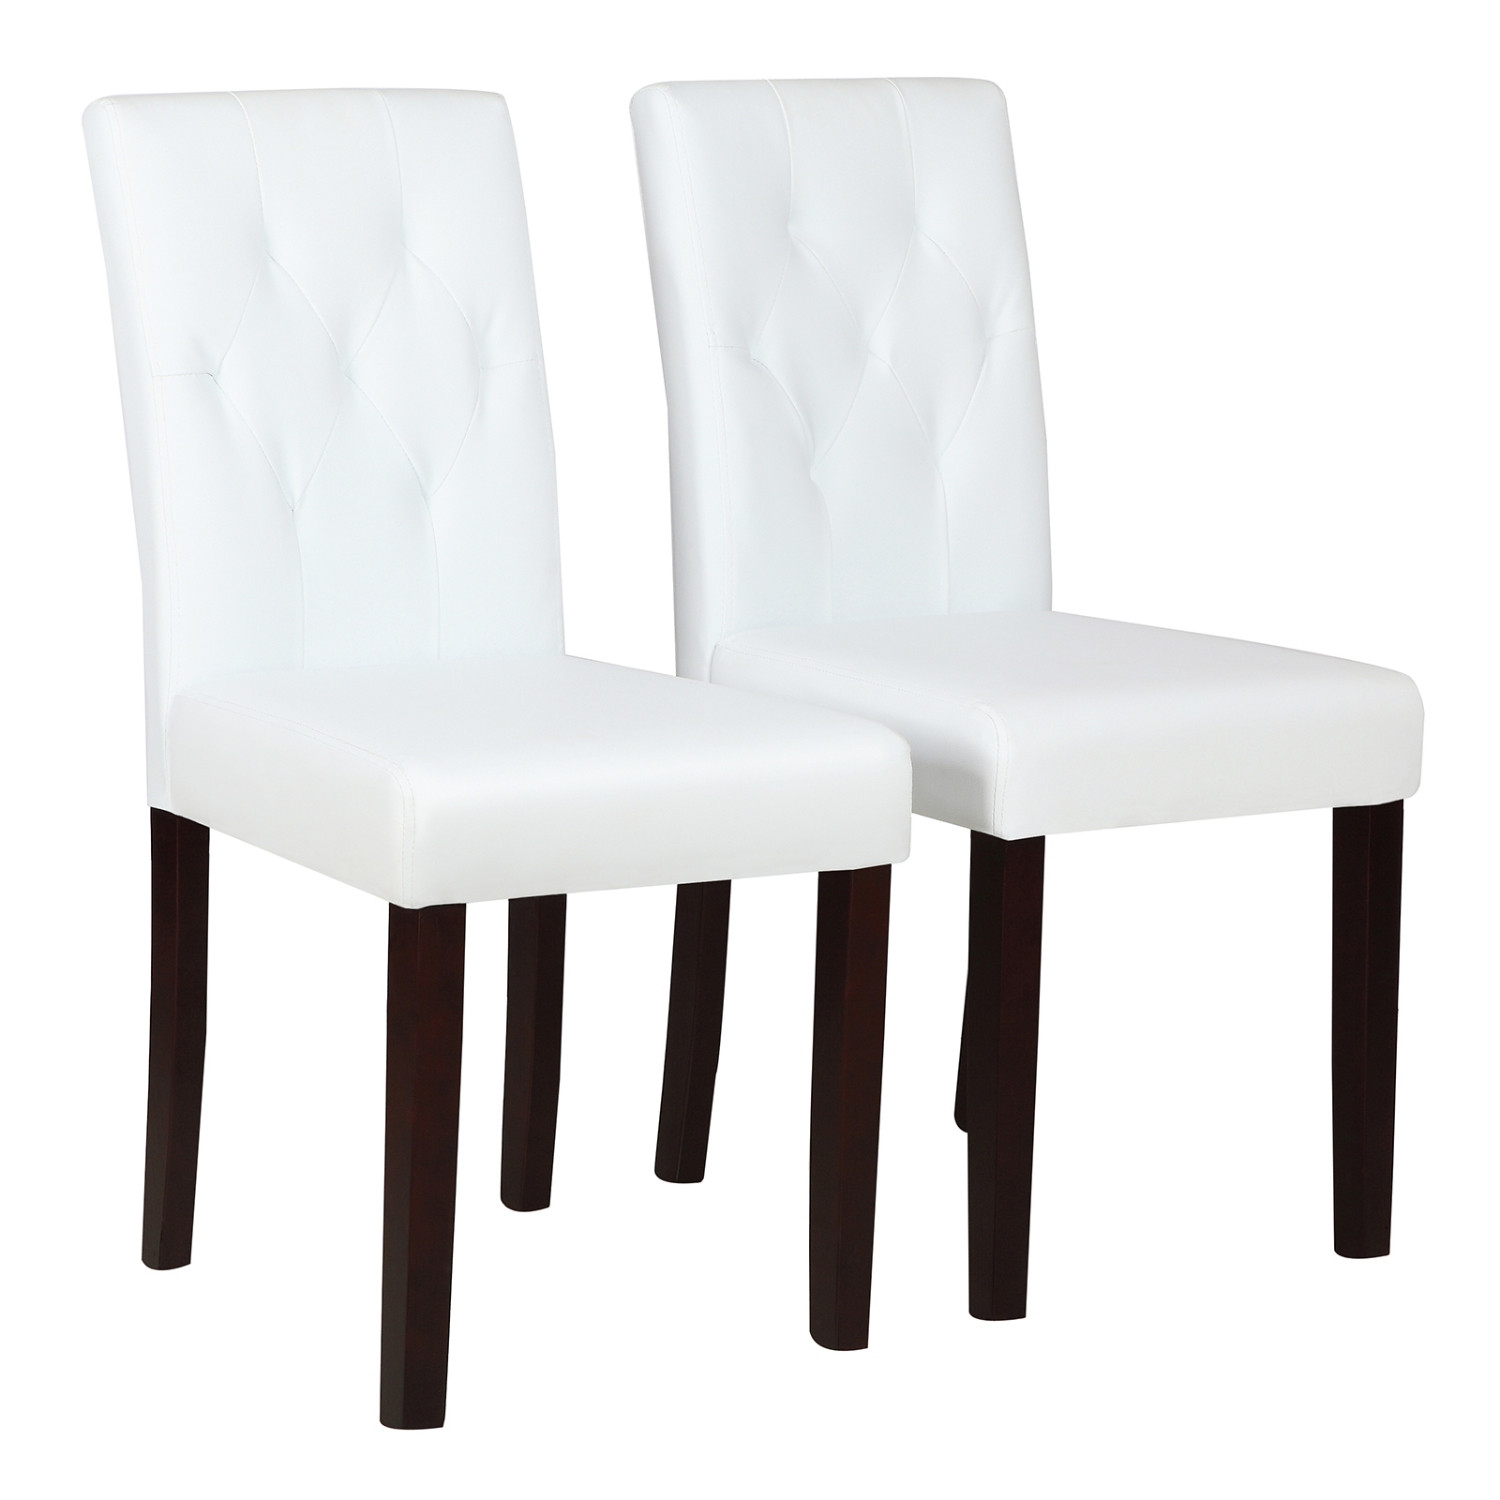 White Leather Kitchen Chairs
 Set of 4 Dining Chair White Leather Kitchen Dining Room